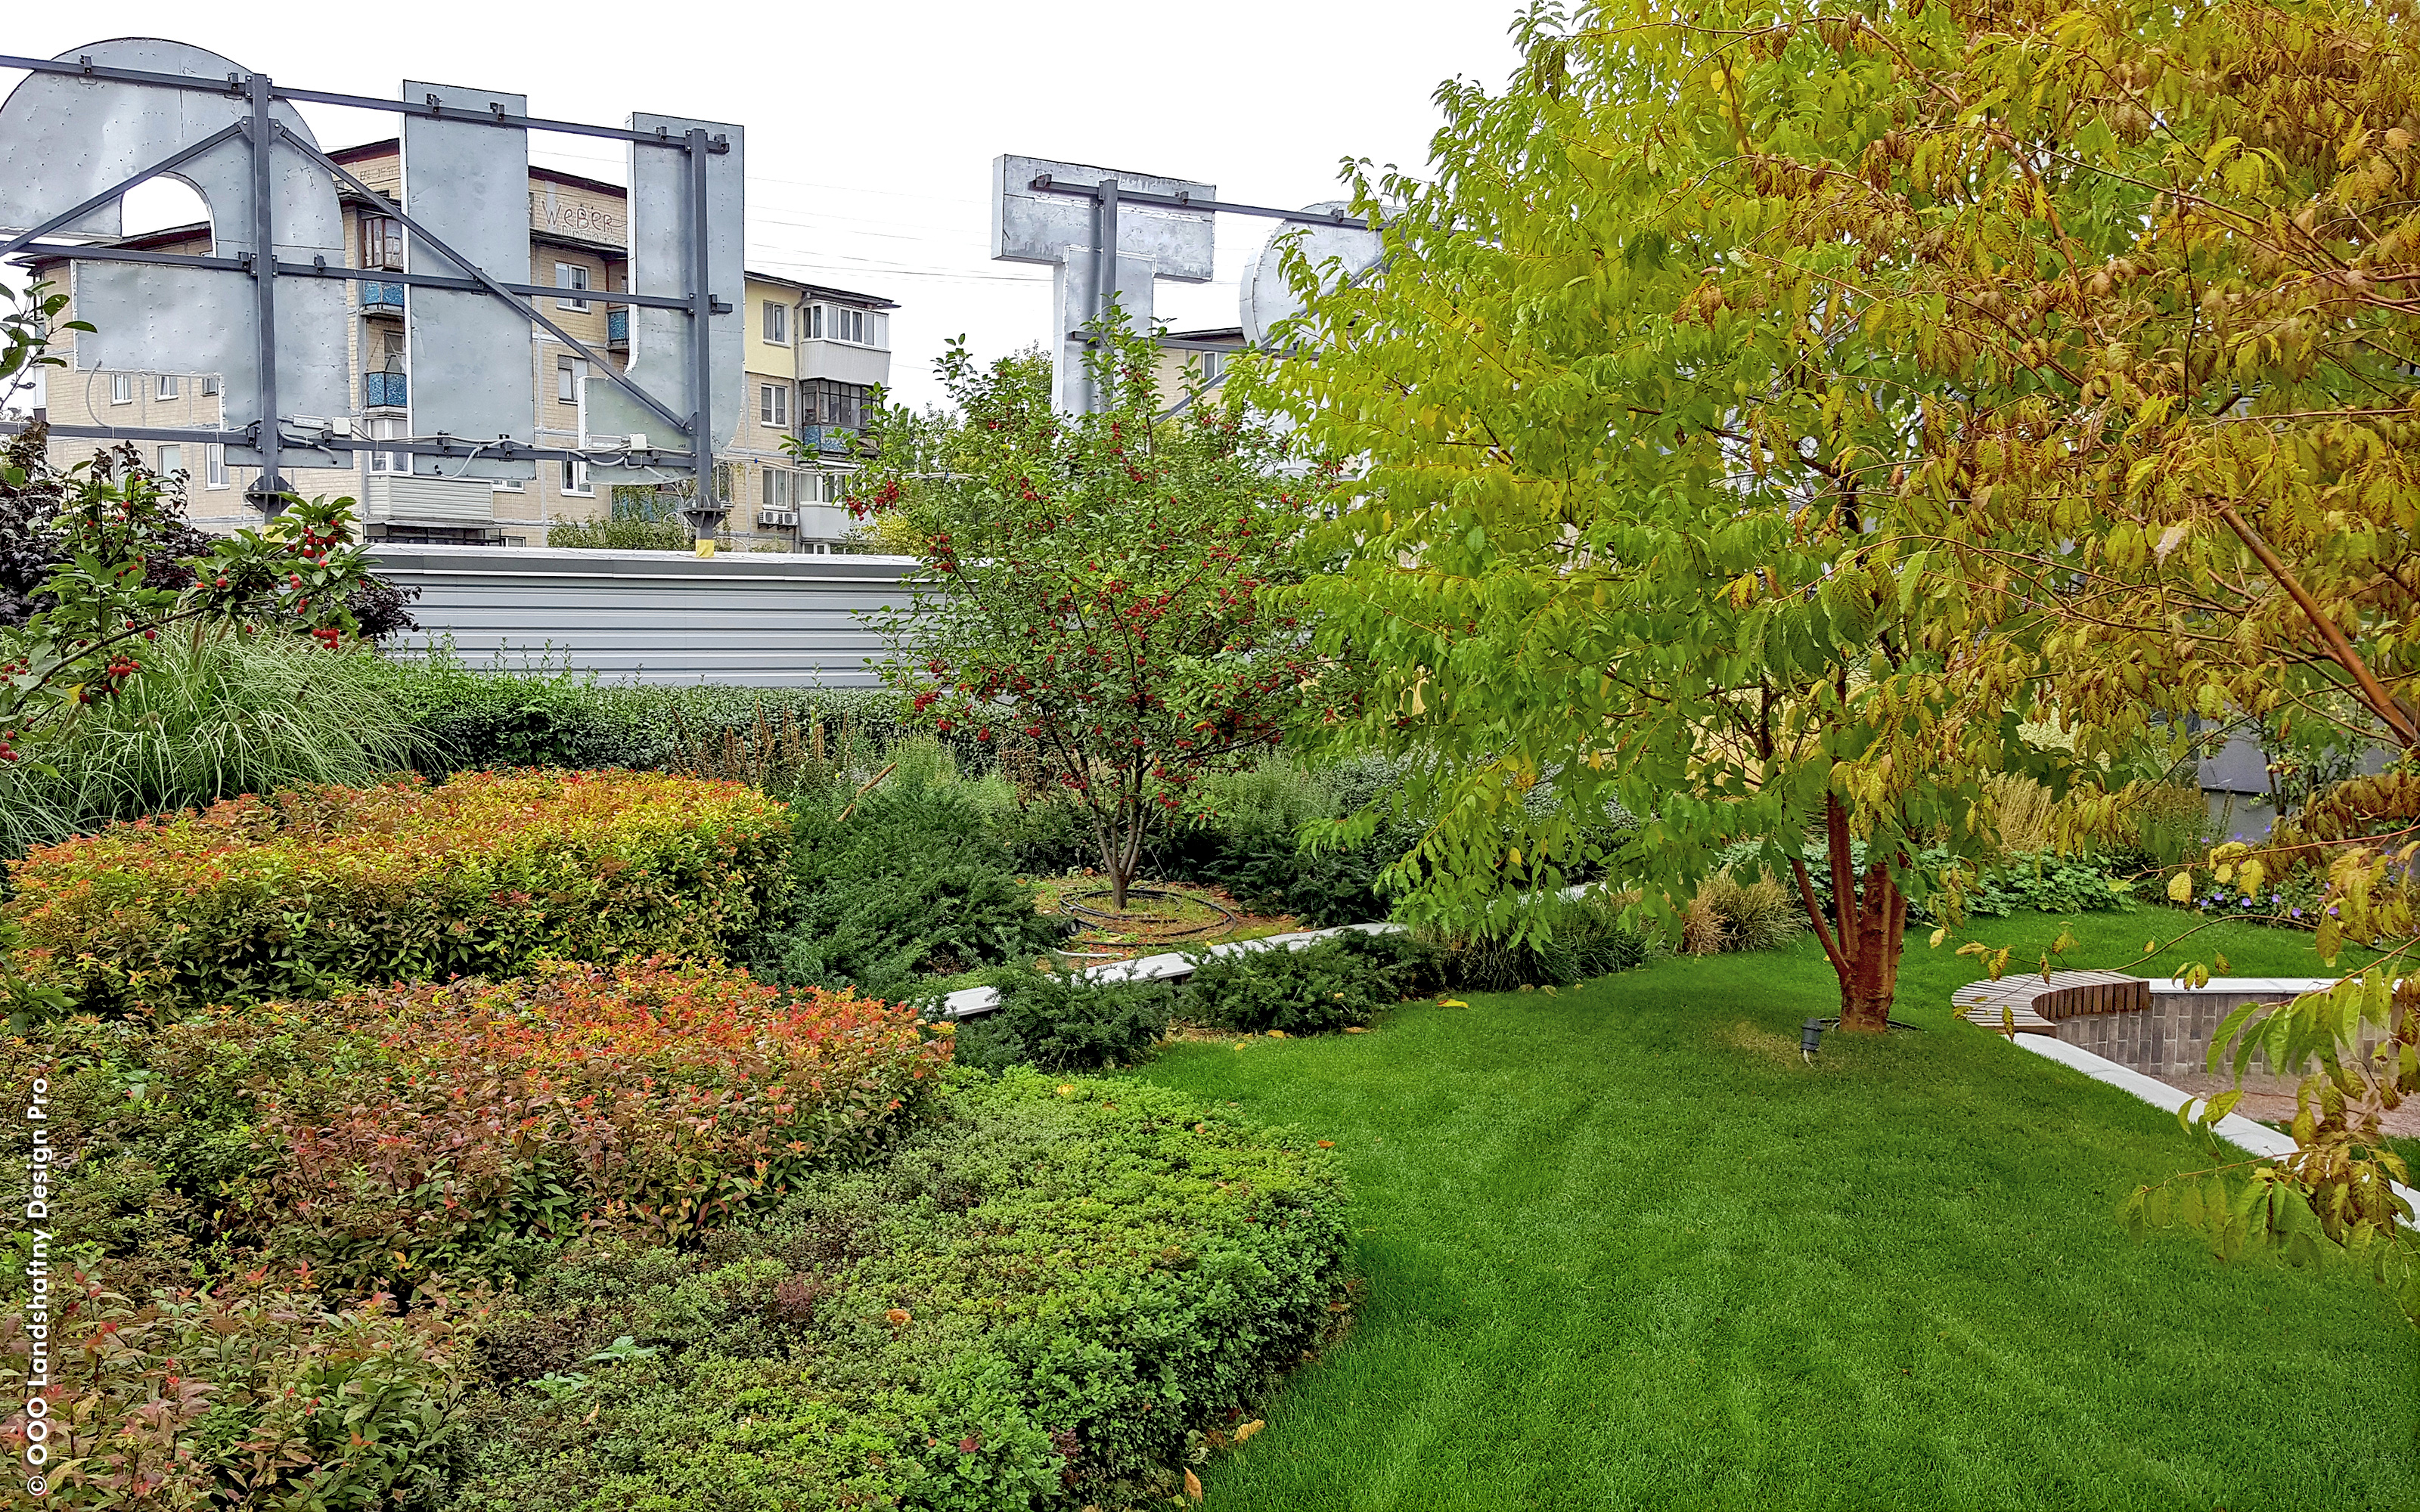 Roof garden with small trees, shrubs and lawn